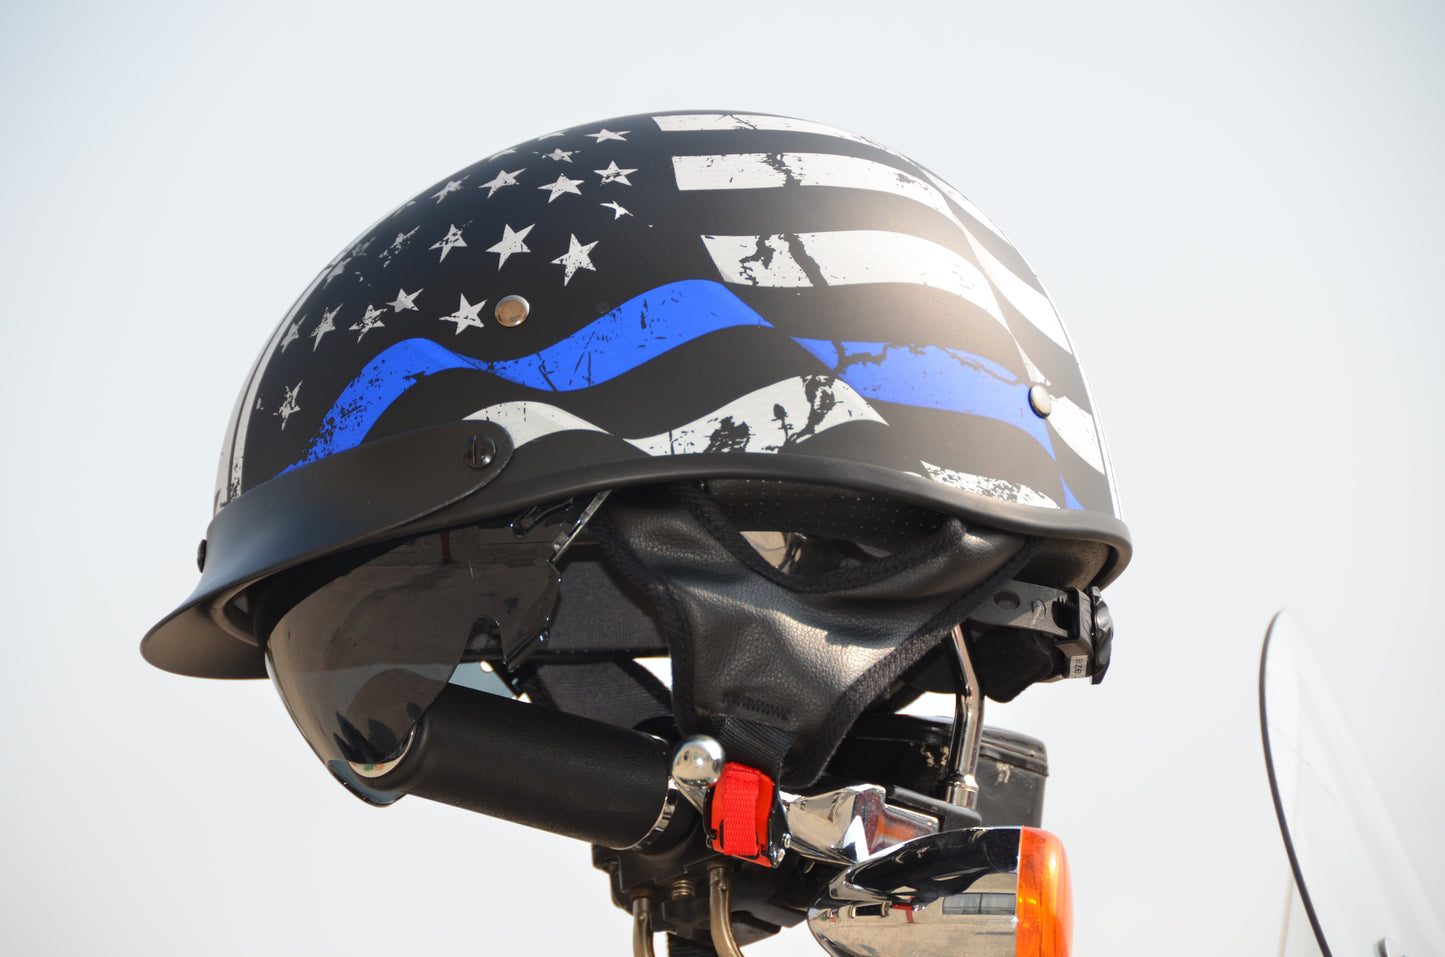 Vega Warrior Half Helmet with size adjuster, dropdown shield and sunvisor - Back the Red